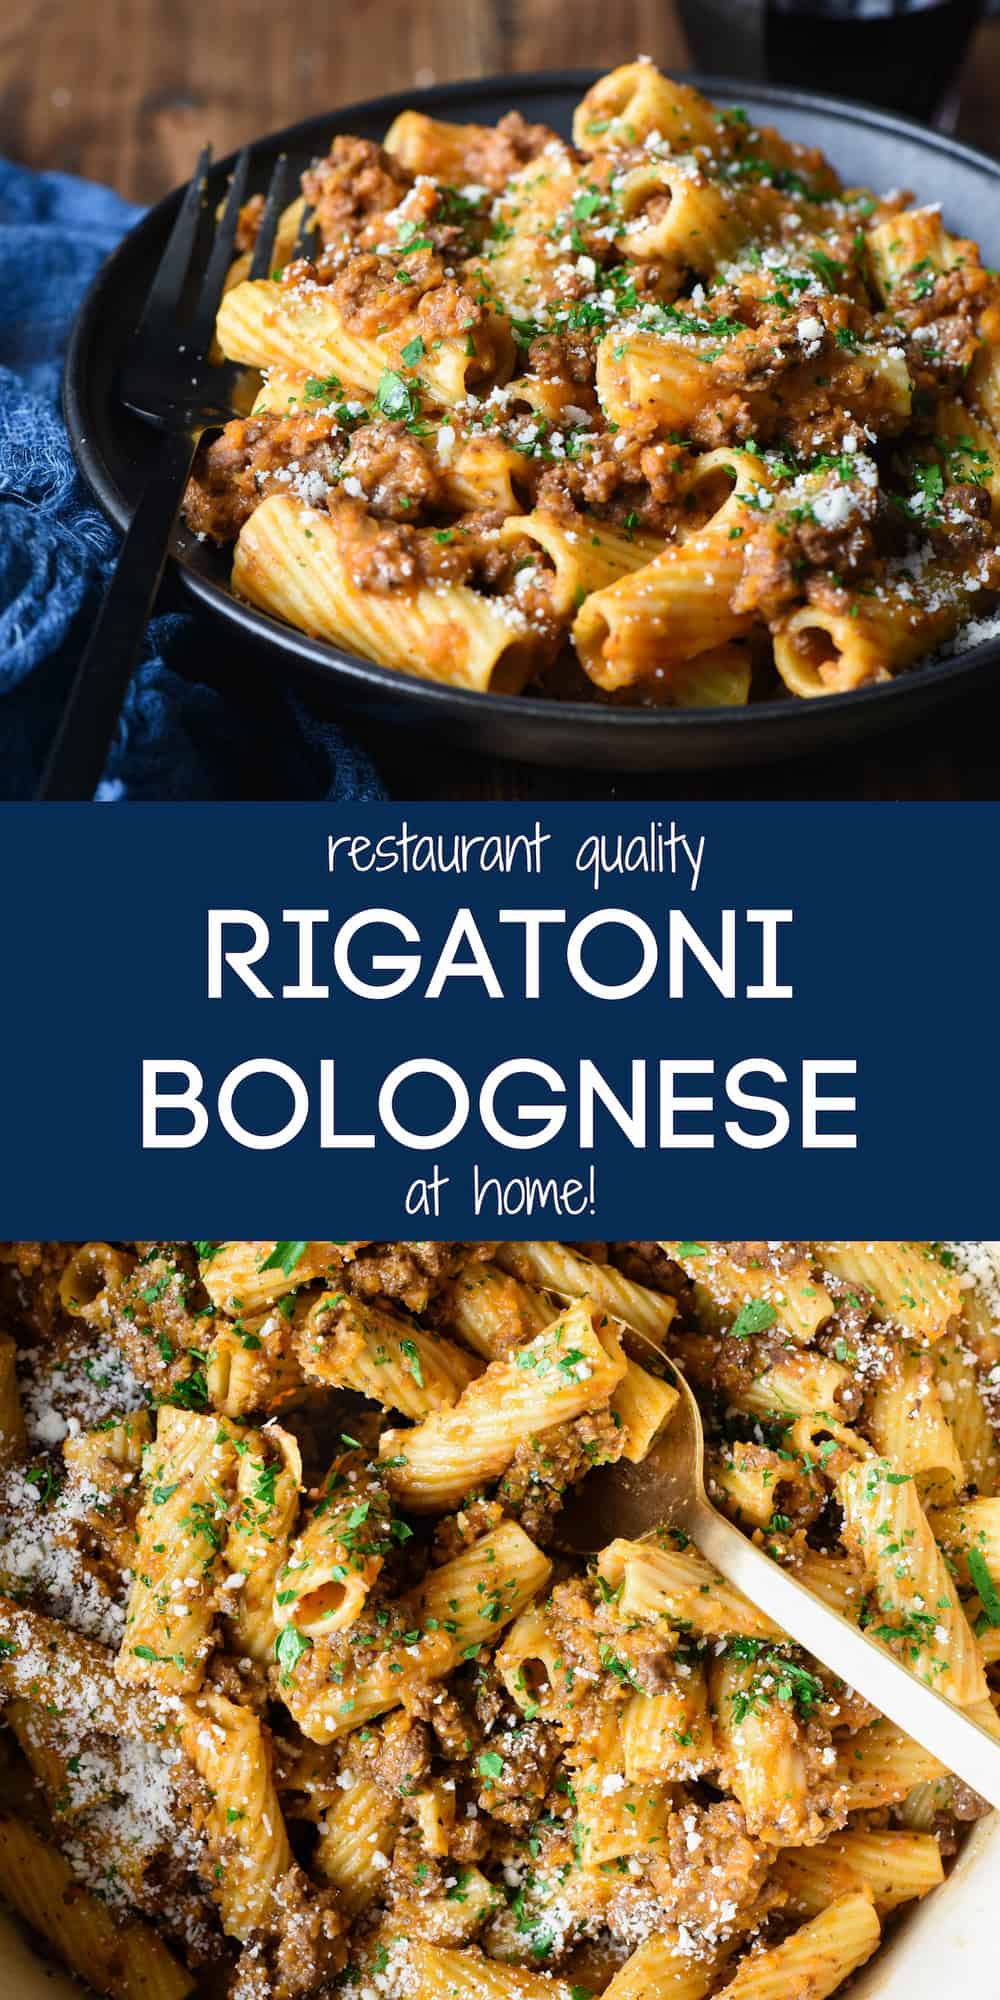 Collage of images of pasta with meat sauce with overlay: restaurant quality RIGATONI BOLOGNESE at home